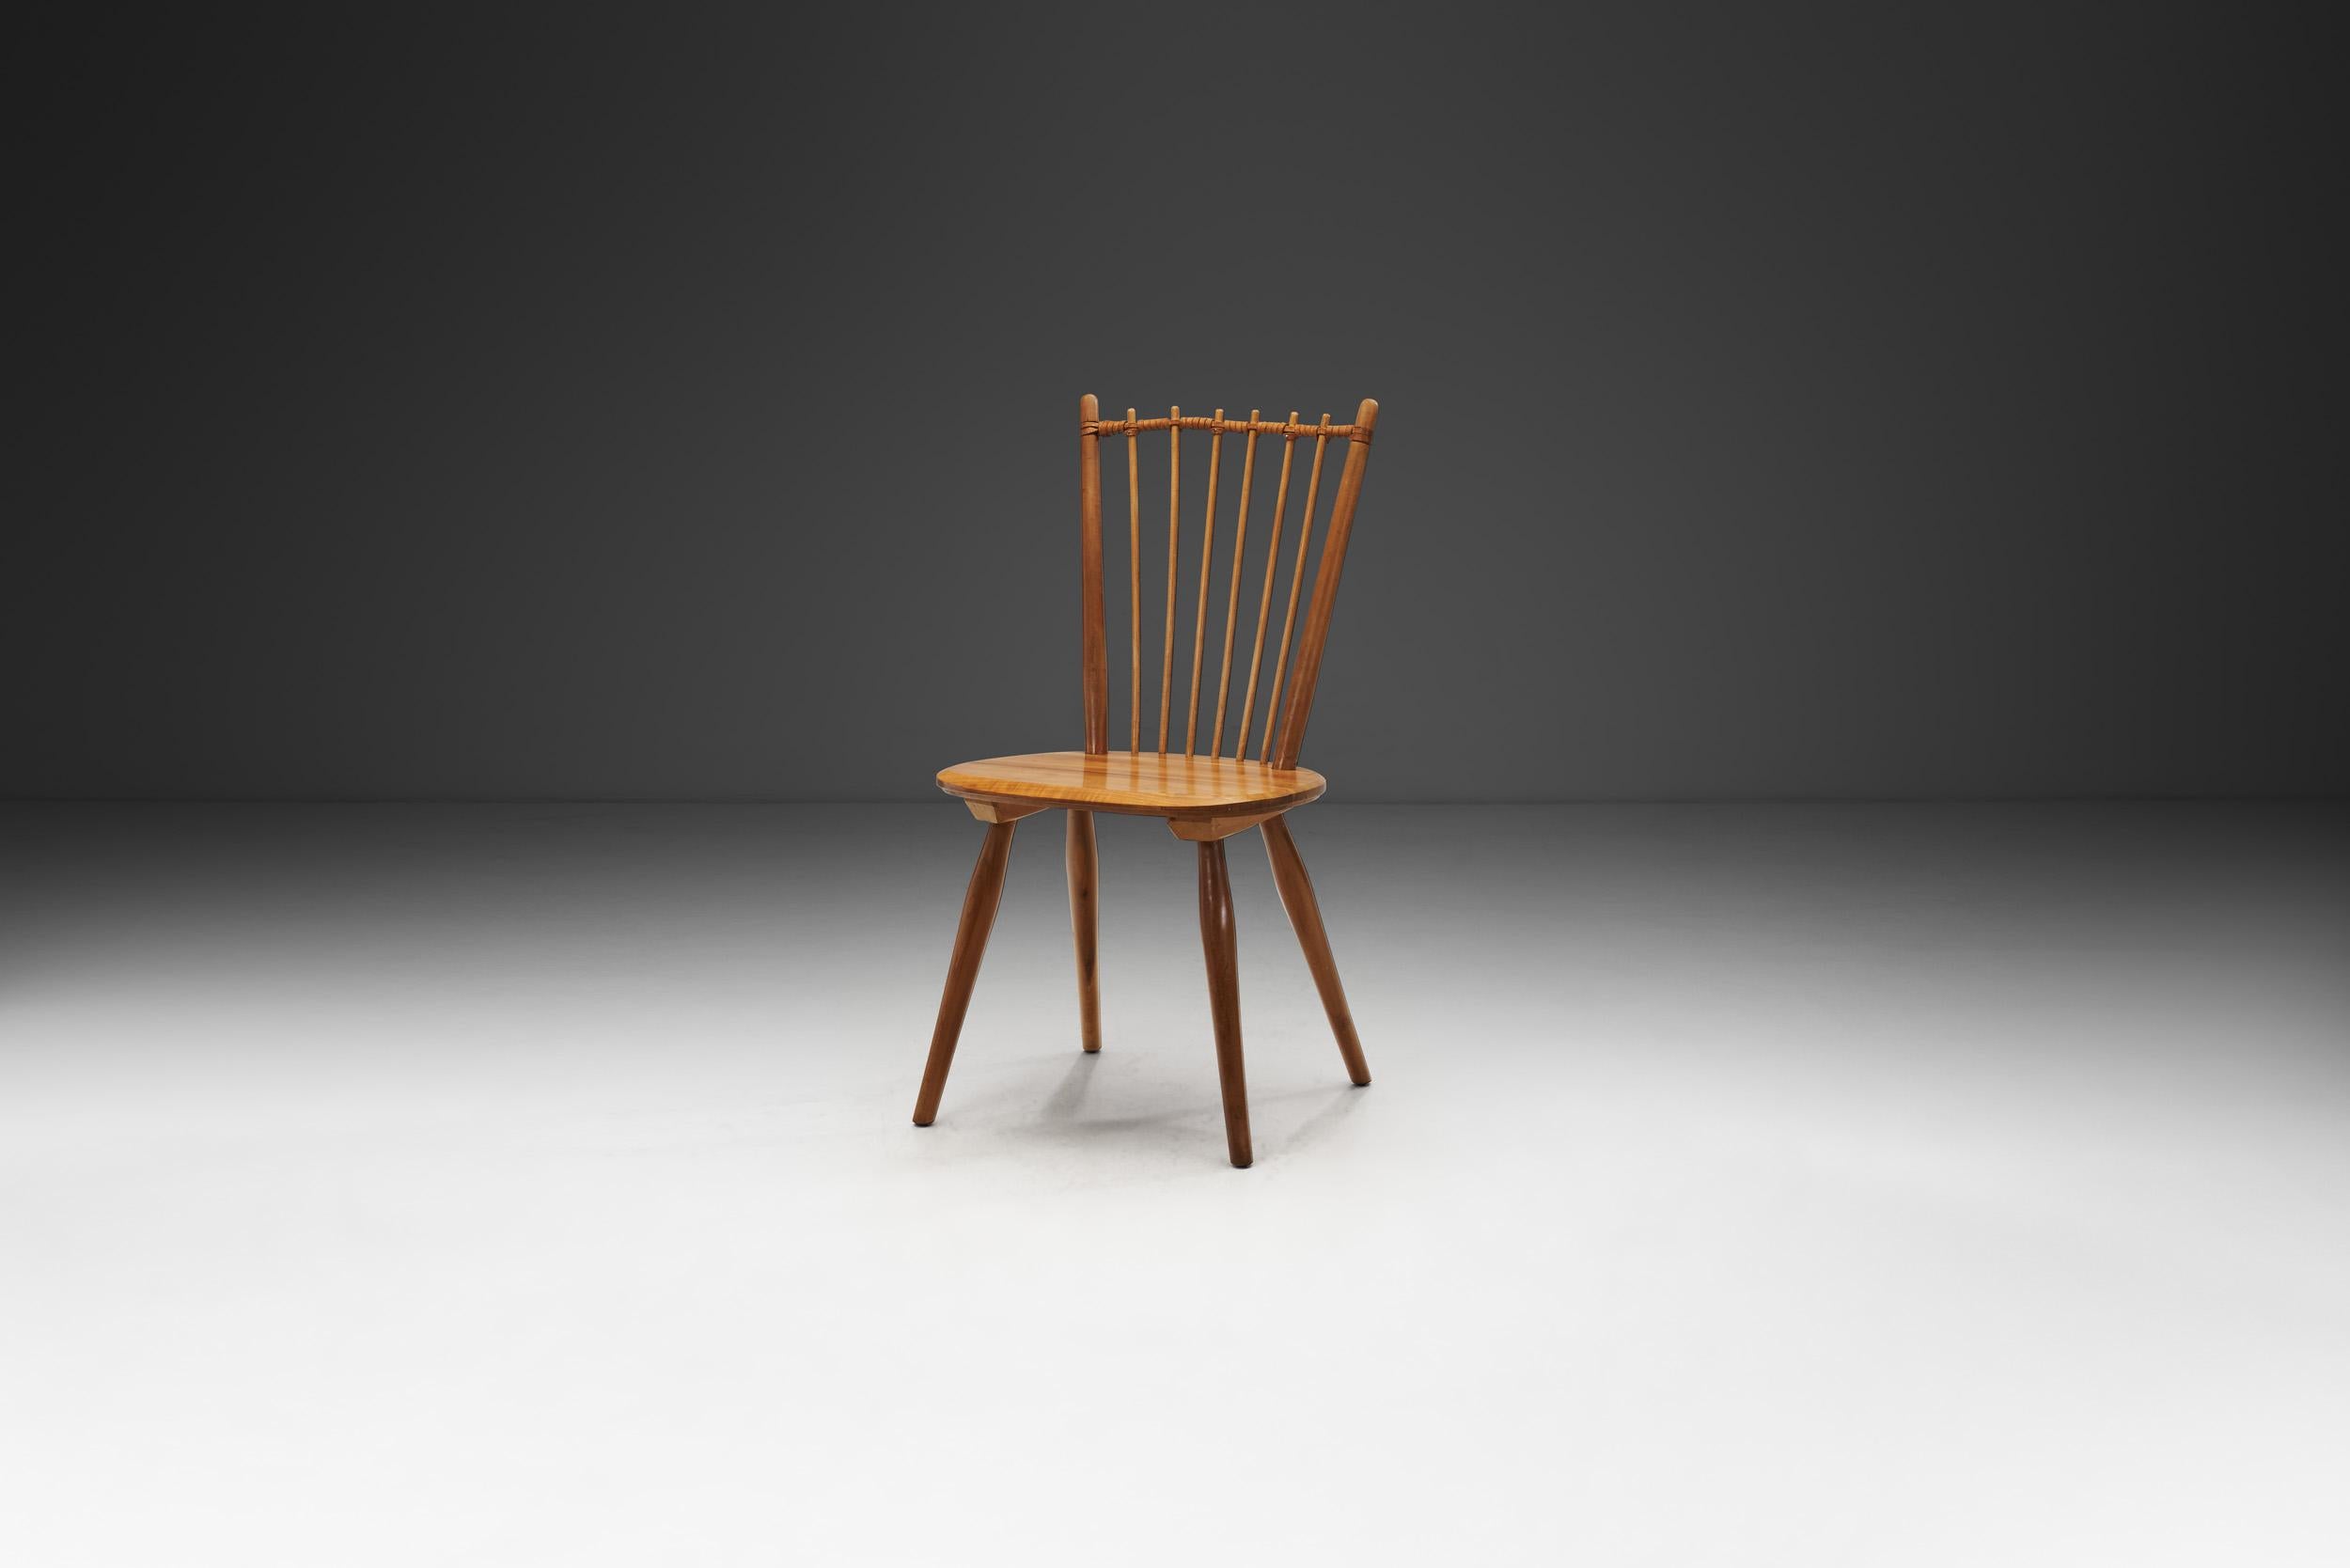 This Arts and Crafts chair is perhaps the most well-known model of German designer, Albert Haberer. The flexible backrest made of thin spindles, held together with the woven leather connection makes the design an immediately recognizable piece of